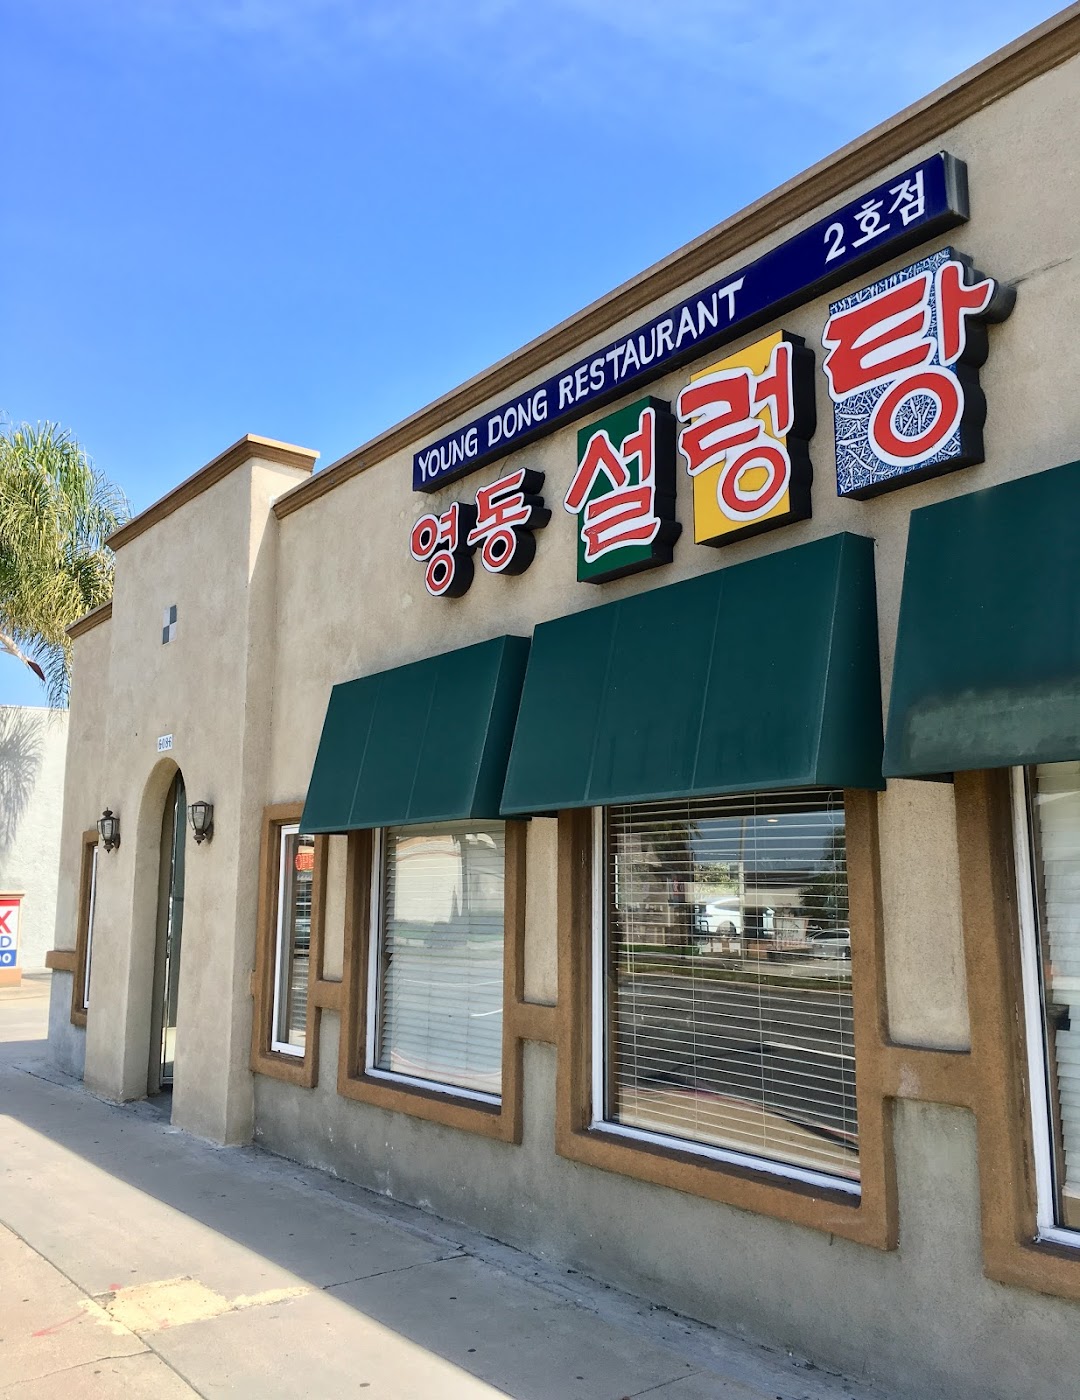 Young Dong Restaurant